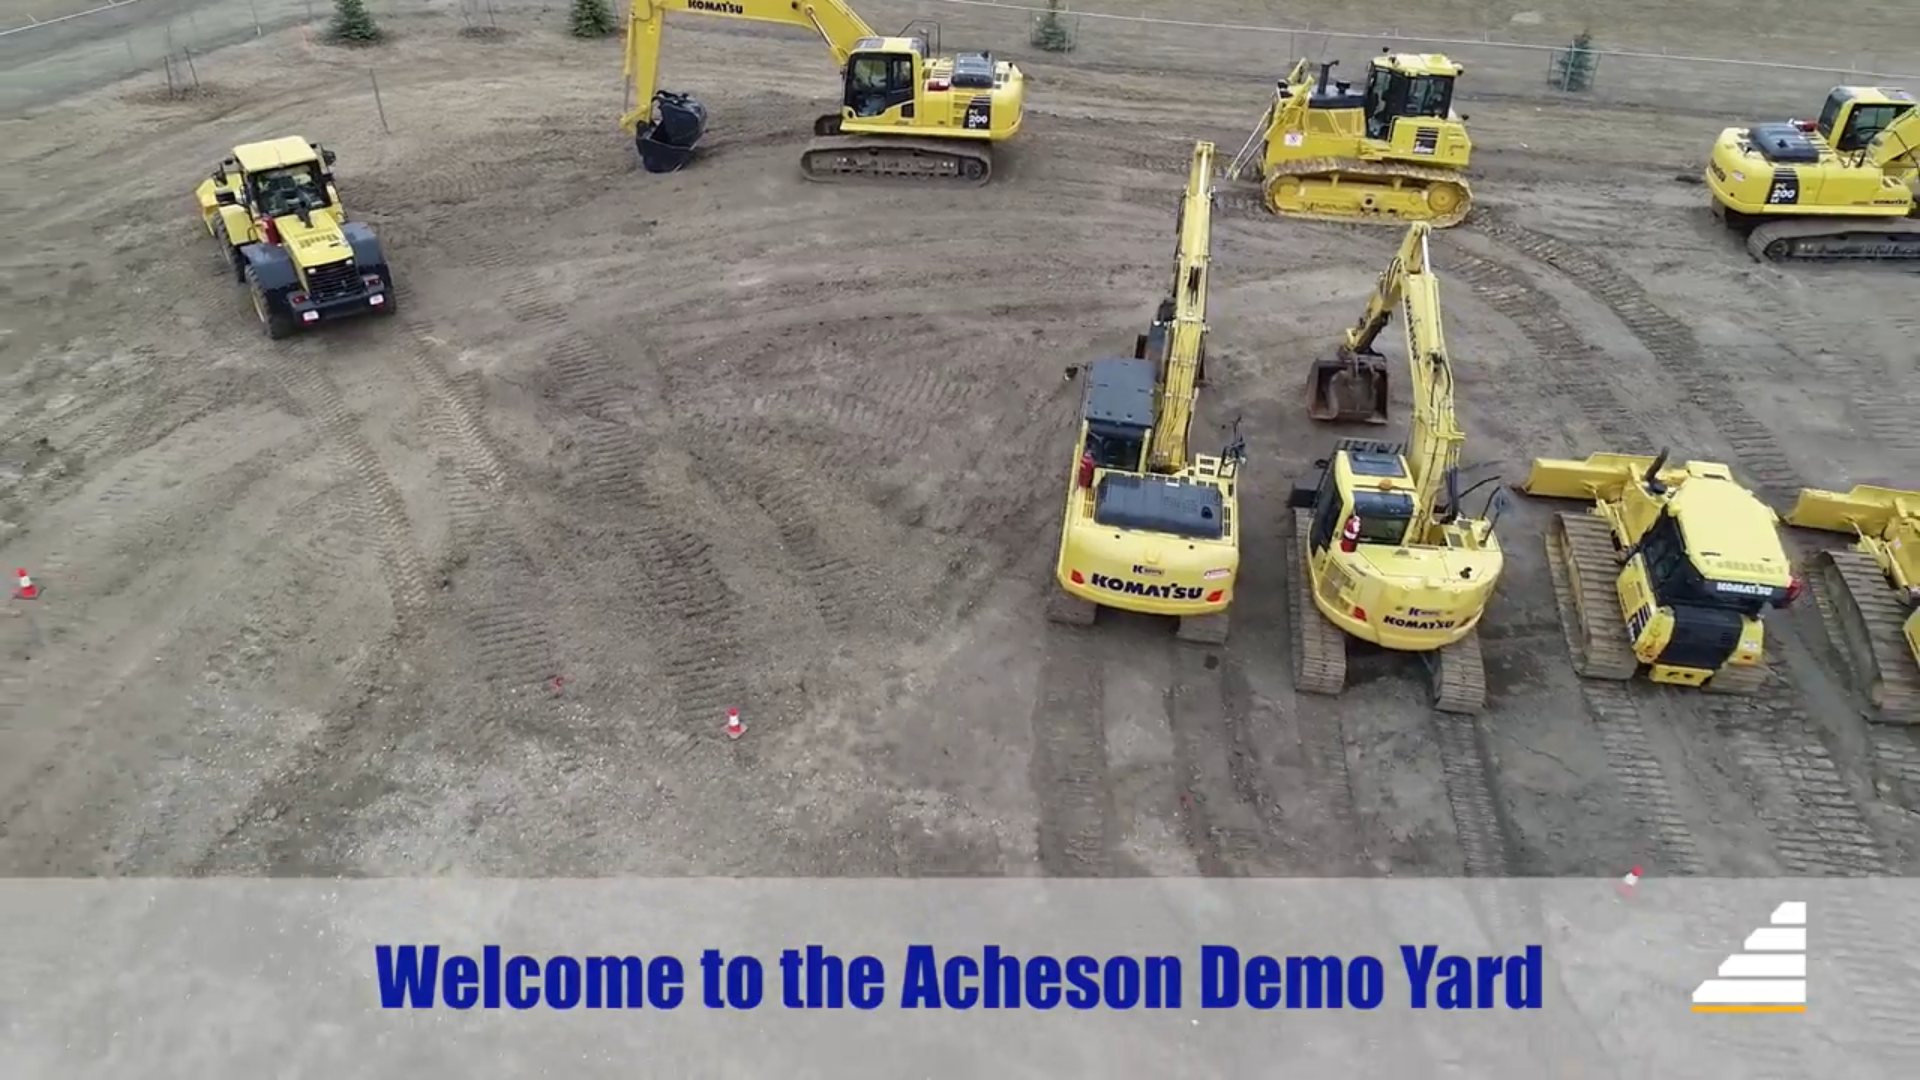 Over 20 Acres of Live Demo Space